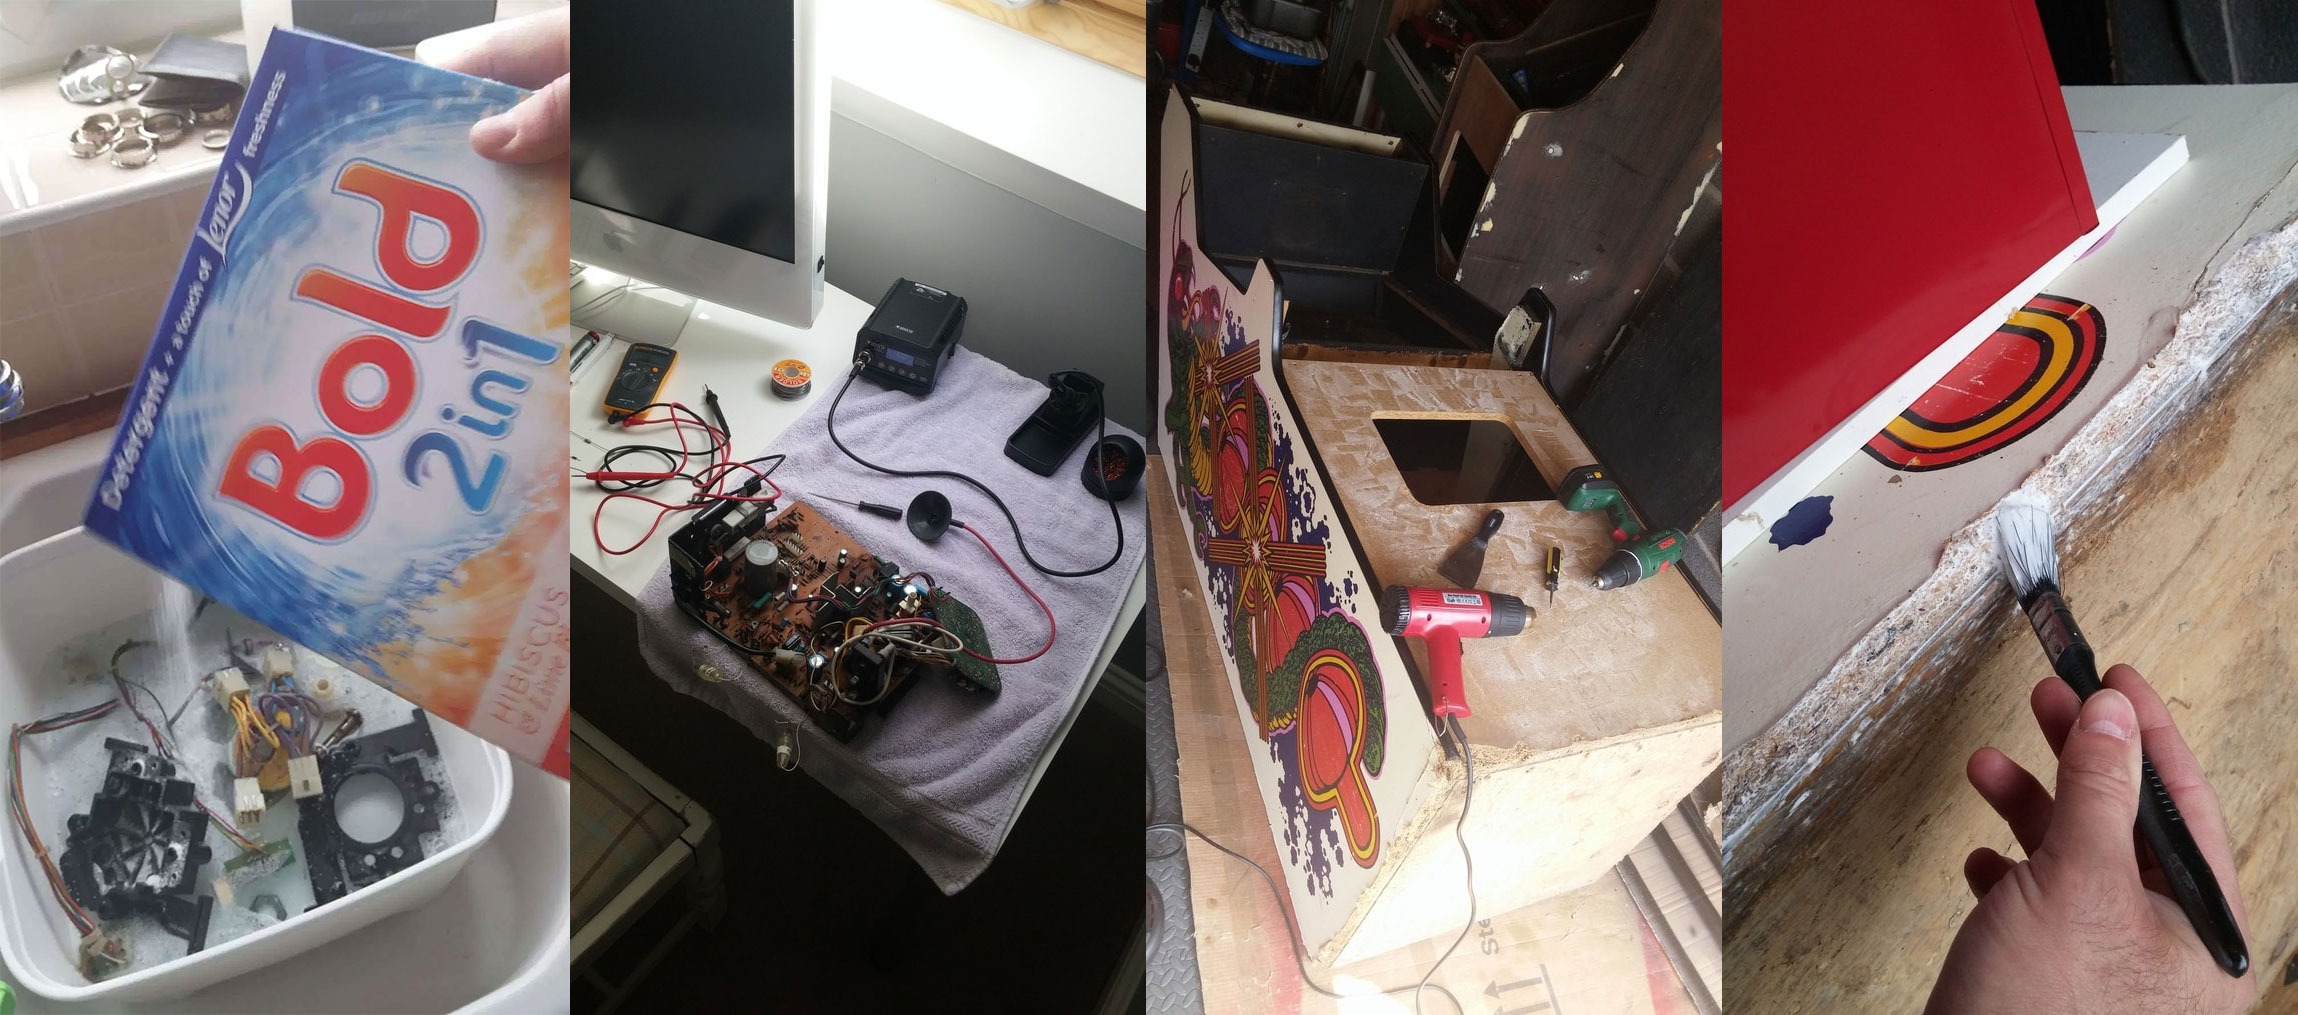 How A Filthy Old Arcade Cabinet Is Restored To Its Former Glory